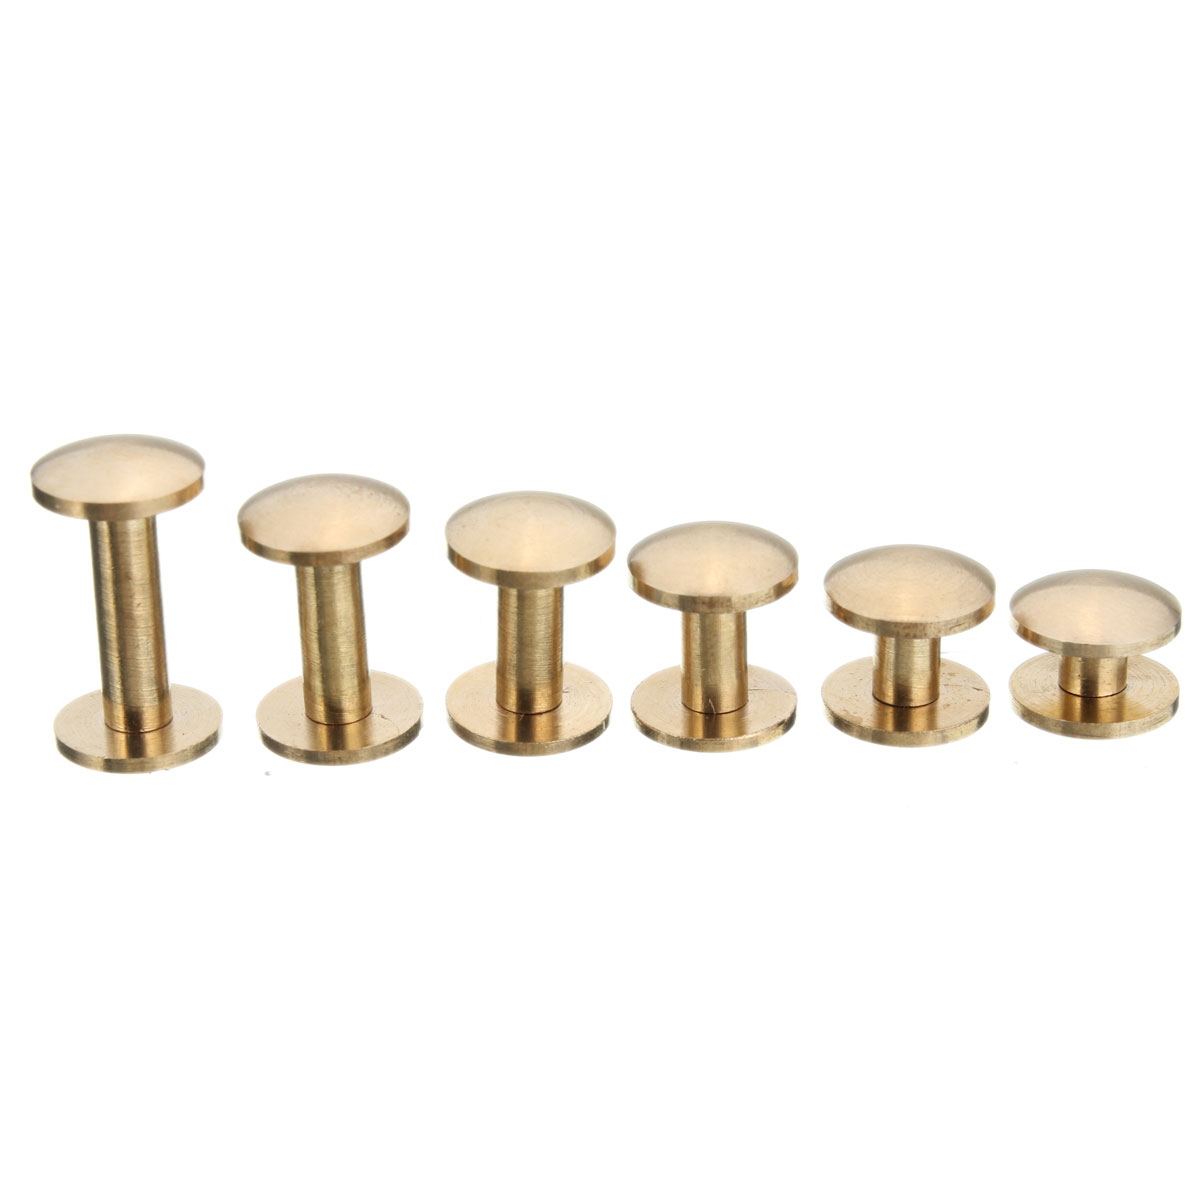 Solid-Brass-Arc-Button-Stud-Screw-Nail-4-15mm-Screw-Back-Leather-Belt-Button-Screws-1034256